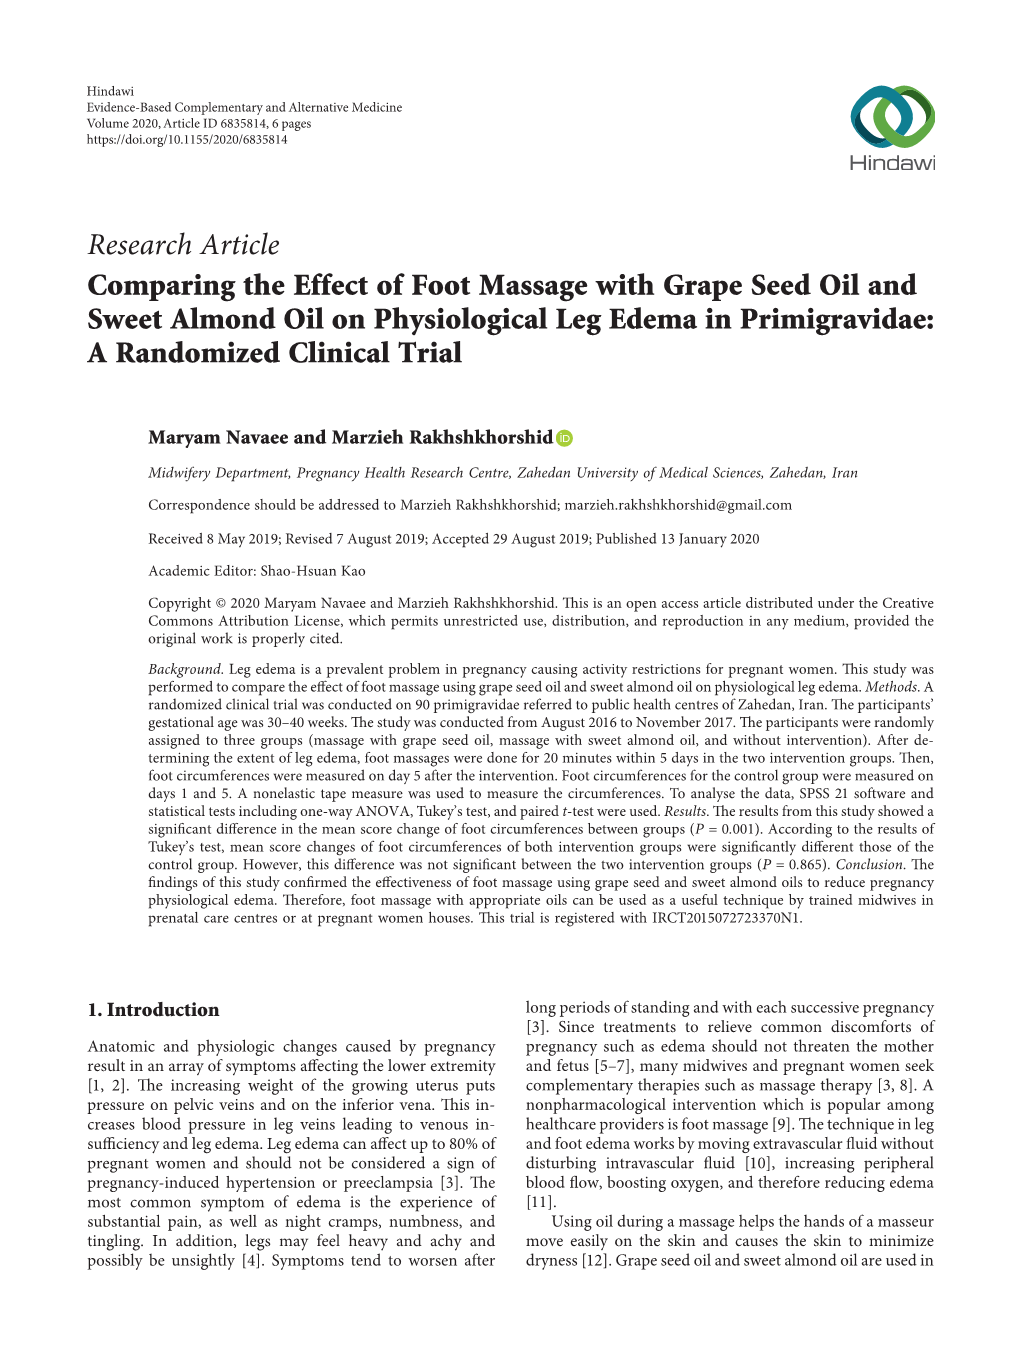 Research Article Comparing the Effect of Foot Massage with Grape Seed